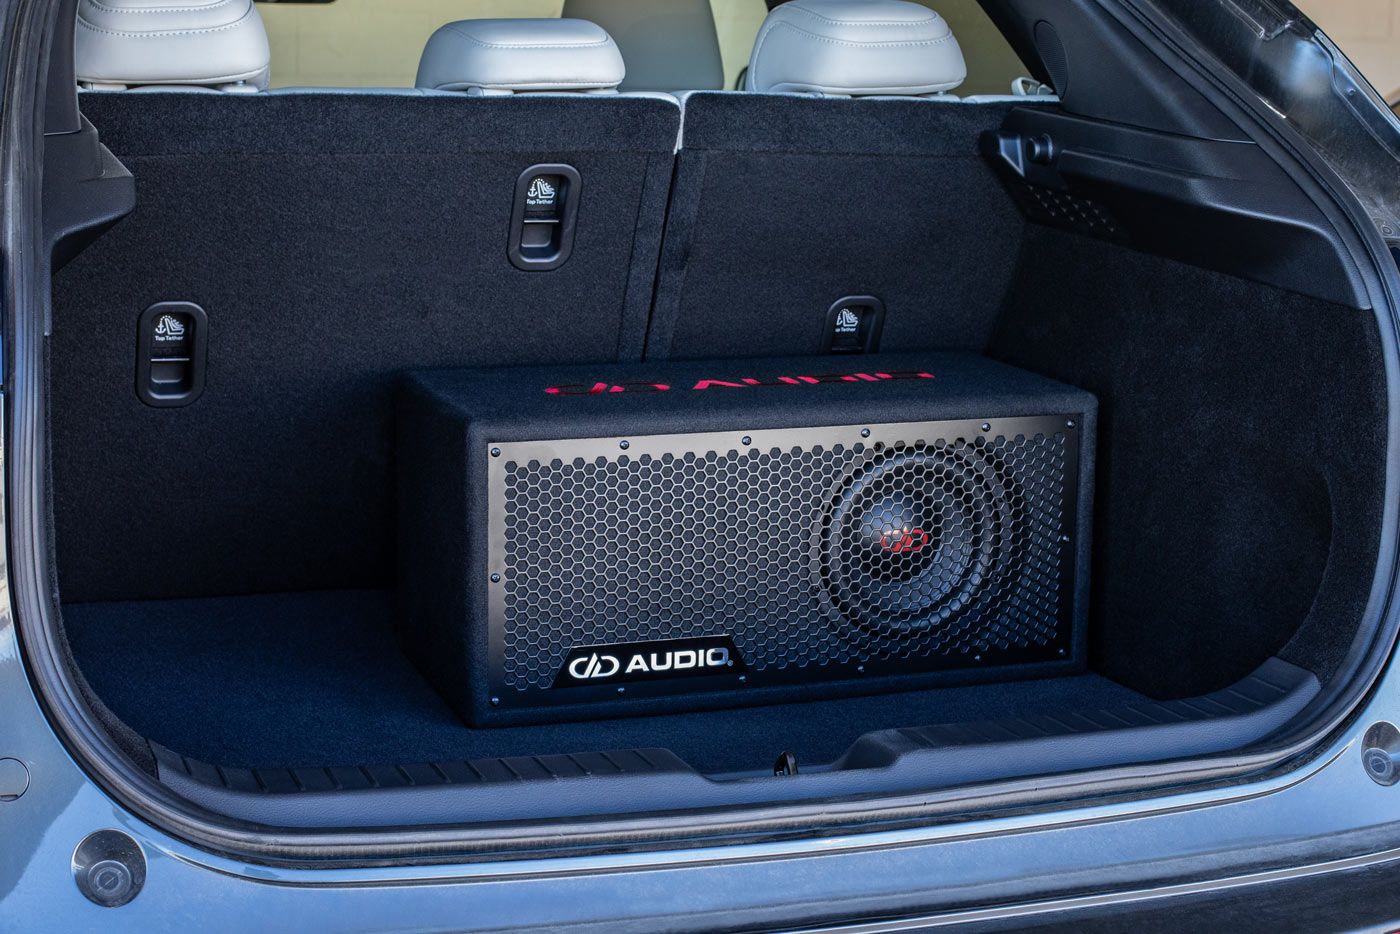 LE-508 8 inch loaded enclosure displayed in compact suv trunk with black carpet